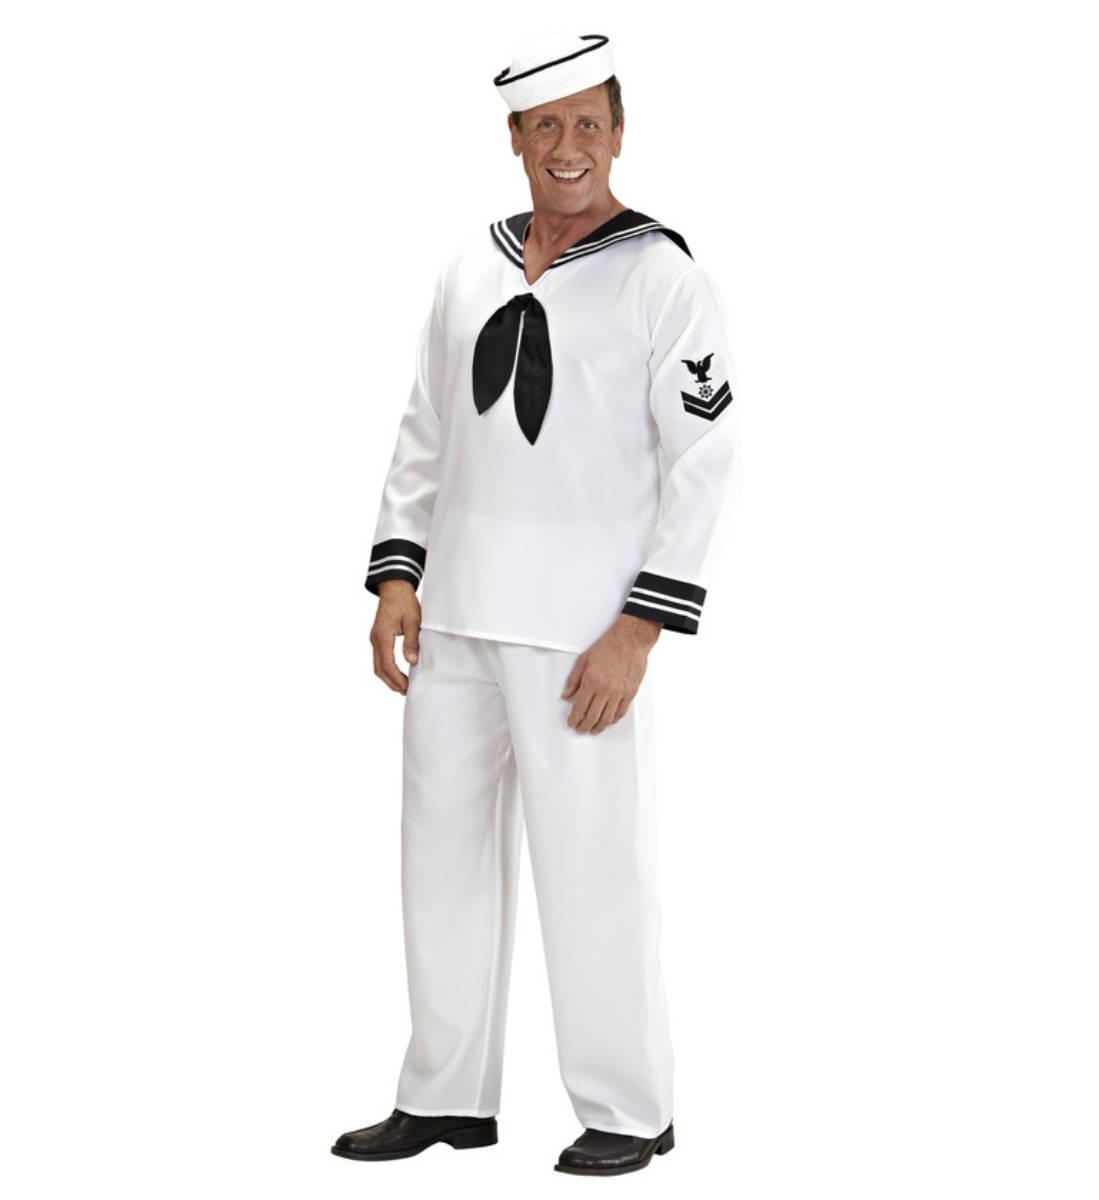 Sailor Fancy Dress Costume by Widmann 5772S available here at Karnival Costumes online party shop